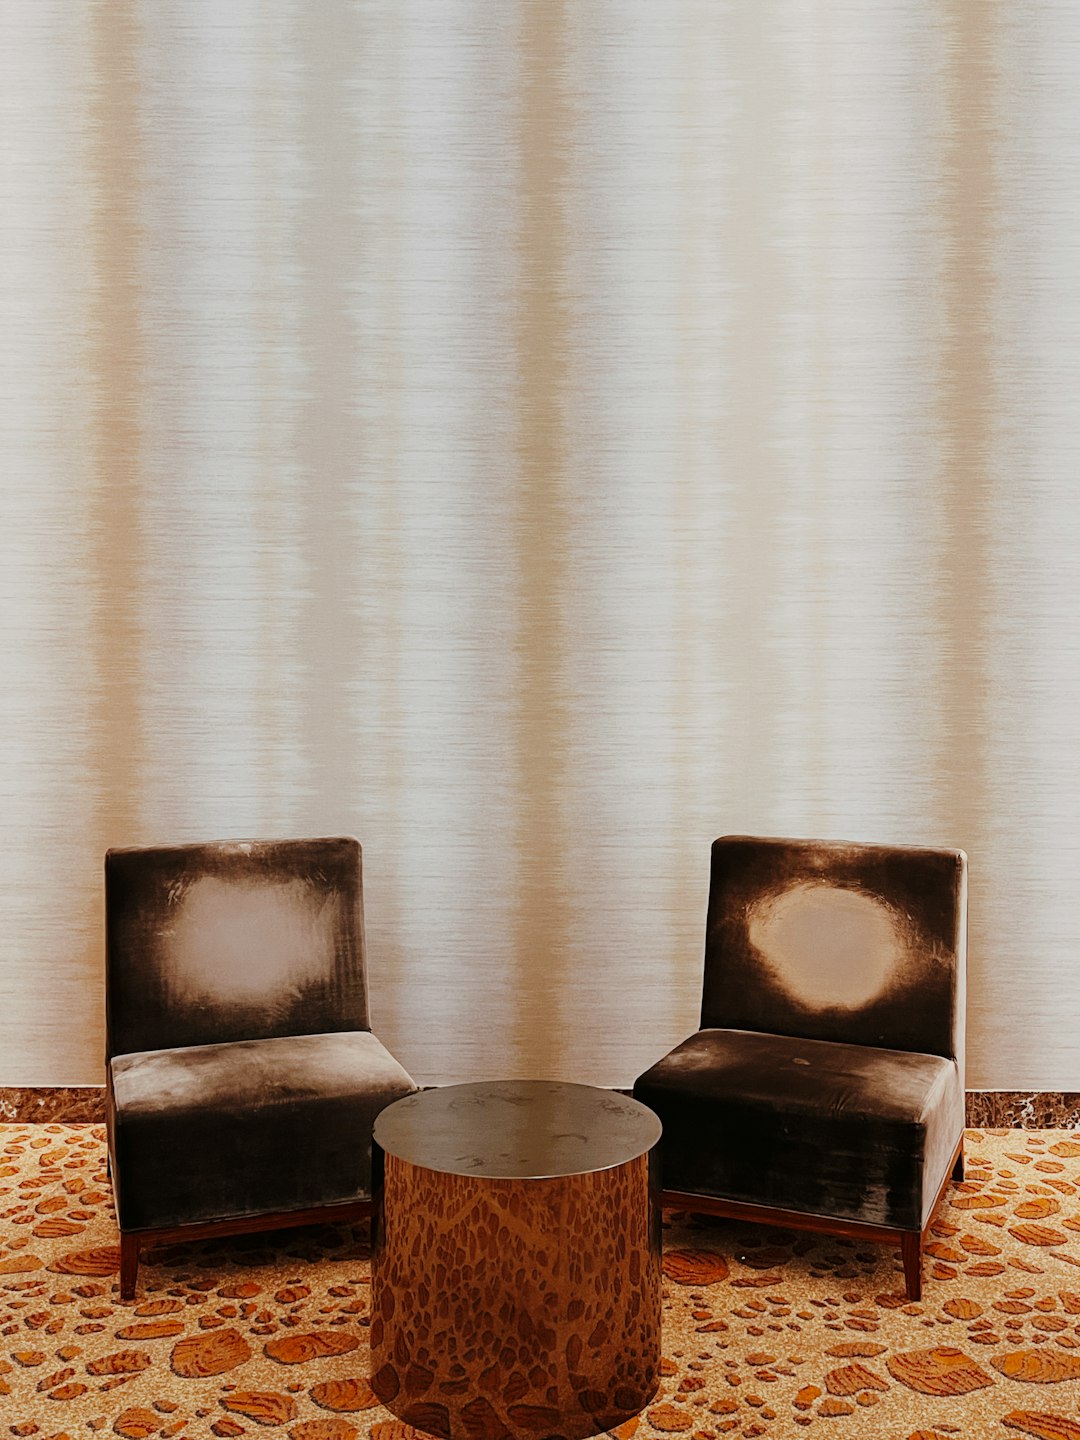 brown wooden round table beside brown and black armchair